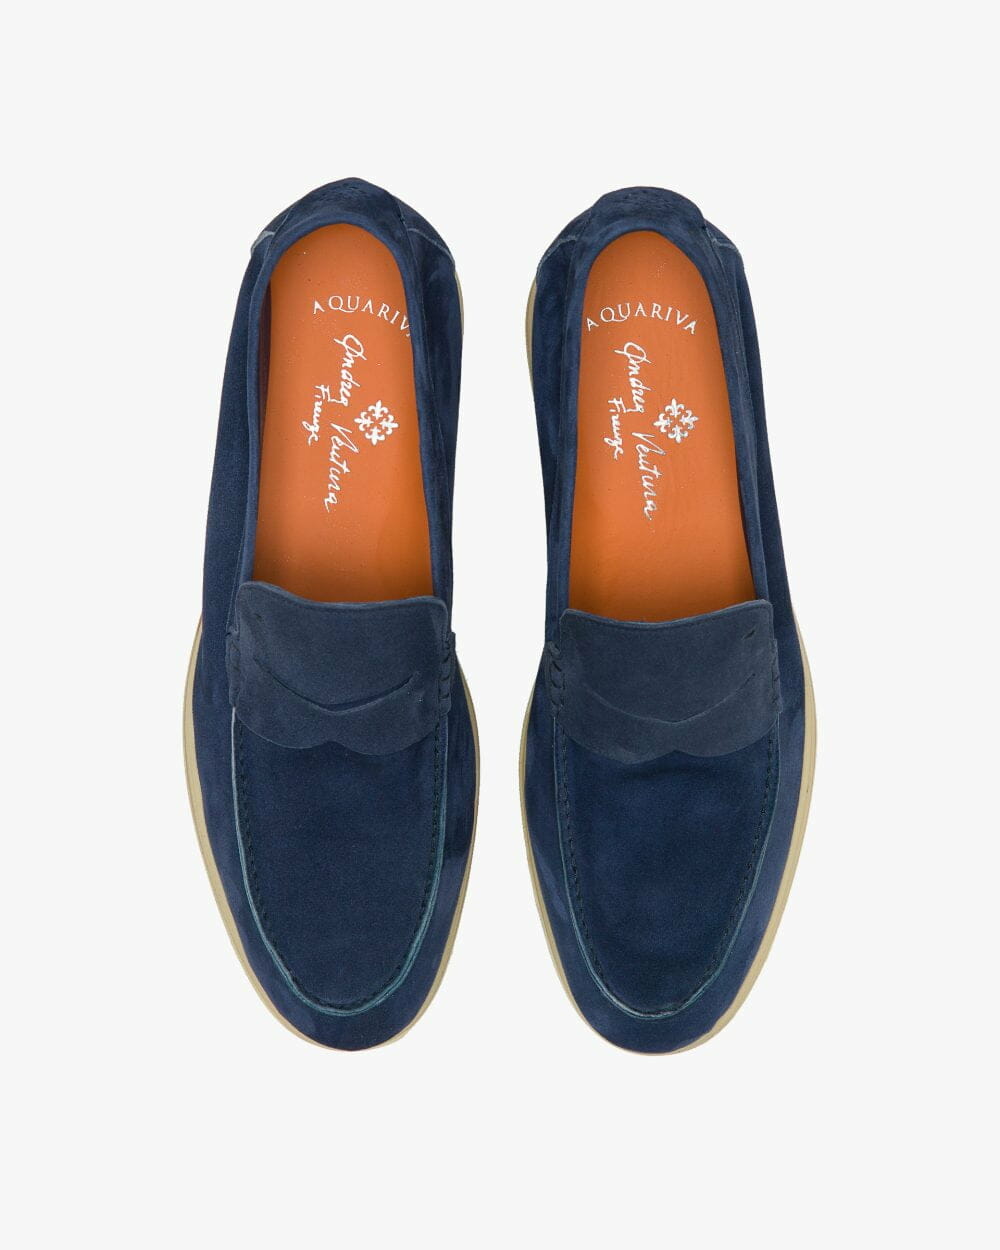 Aquariva-80-suede-blue-navy-from-above